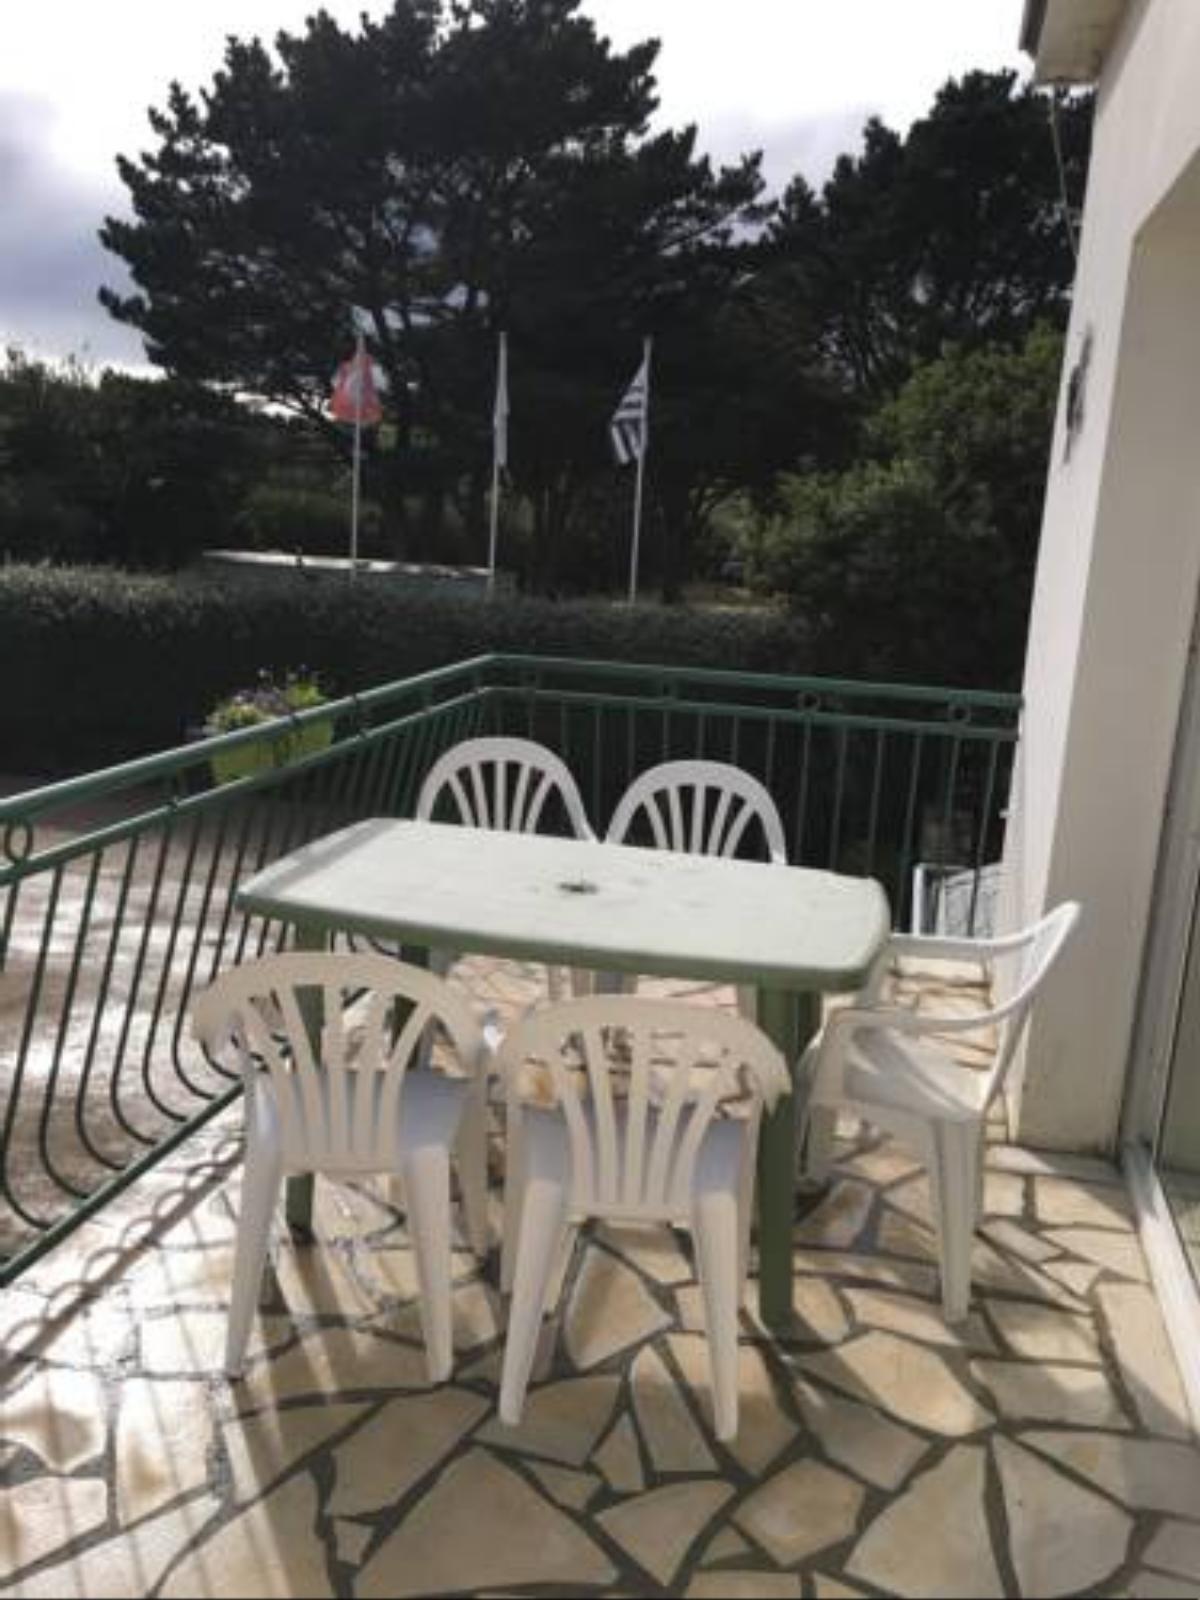 Appartements Kost-Ar-Moor Hotel Fouesnant France